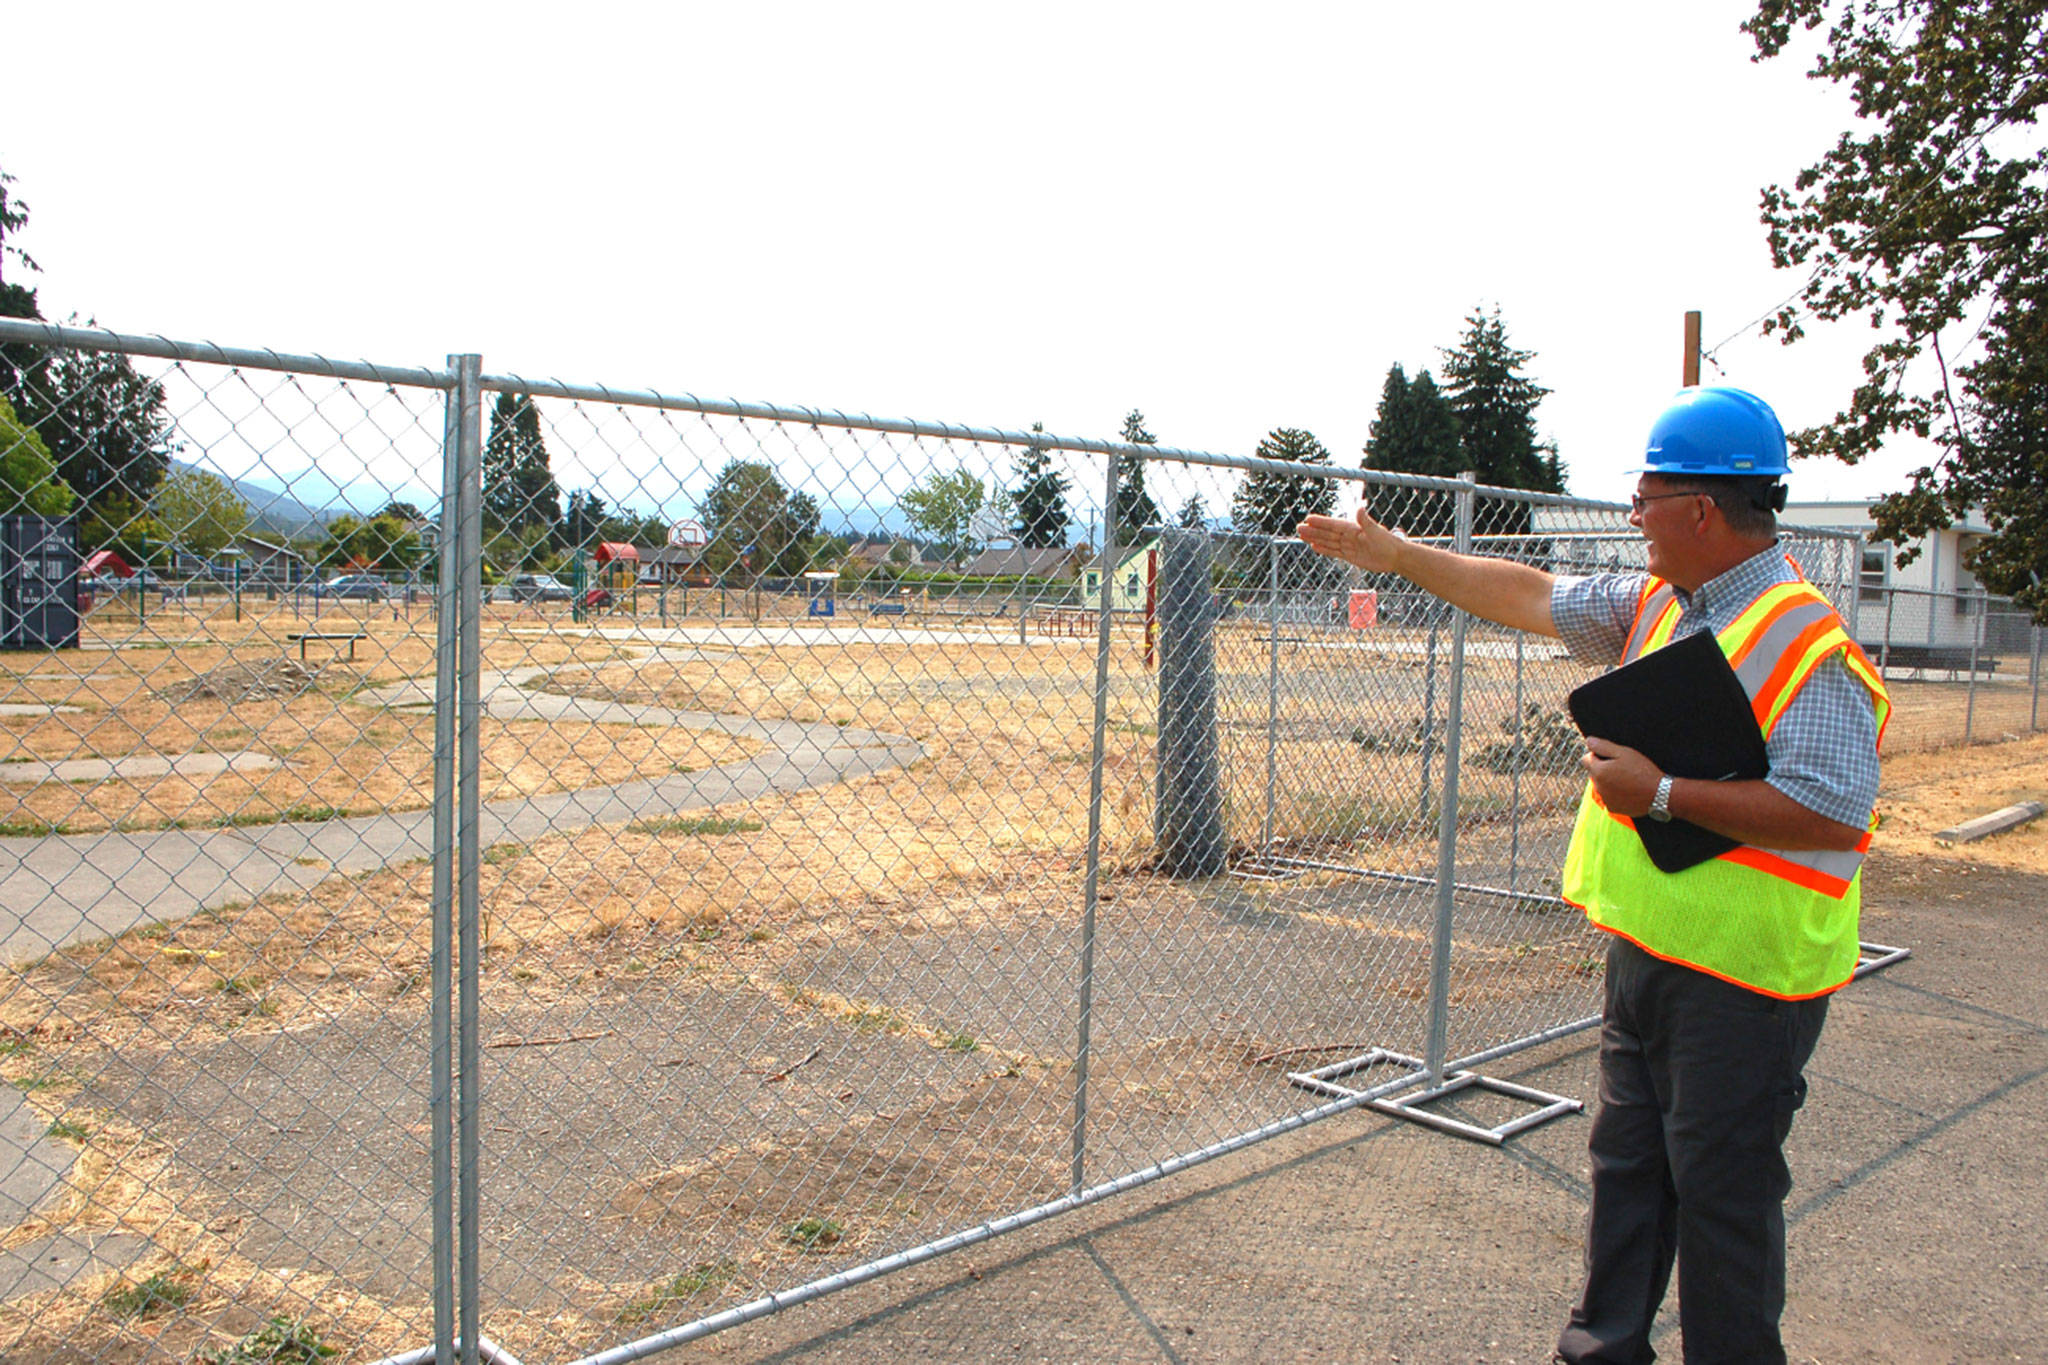 John McAndie, Sequim School District’s maintenance and operations supervisor and director of facilities, says the playground next to the Community School on West Fir Street and North Second Avenue is closed as the district’s new central kitchen is built. Olympic Peninsula Academy parents say they have questions where their students will play at recess as students are put in portables for temporary housing while the kitchen is built. Sequim Gazette photo by Erin Hawkins